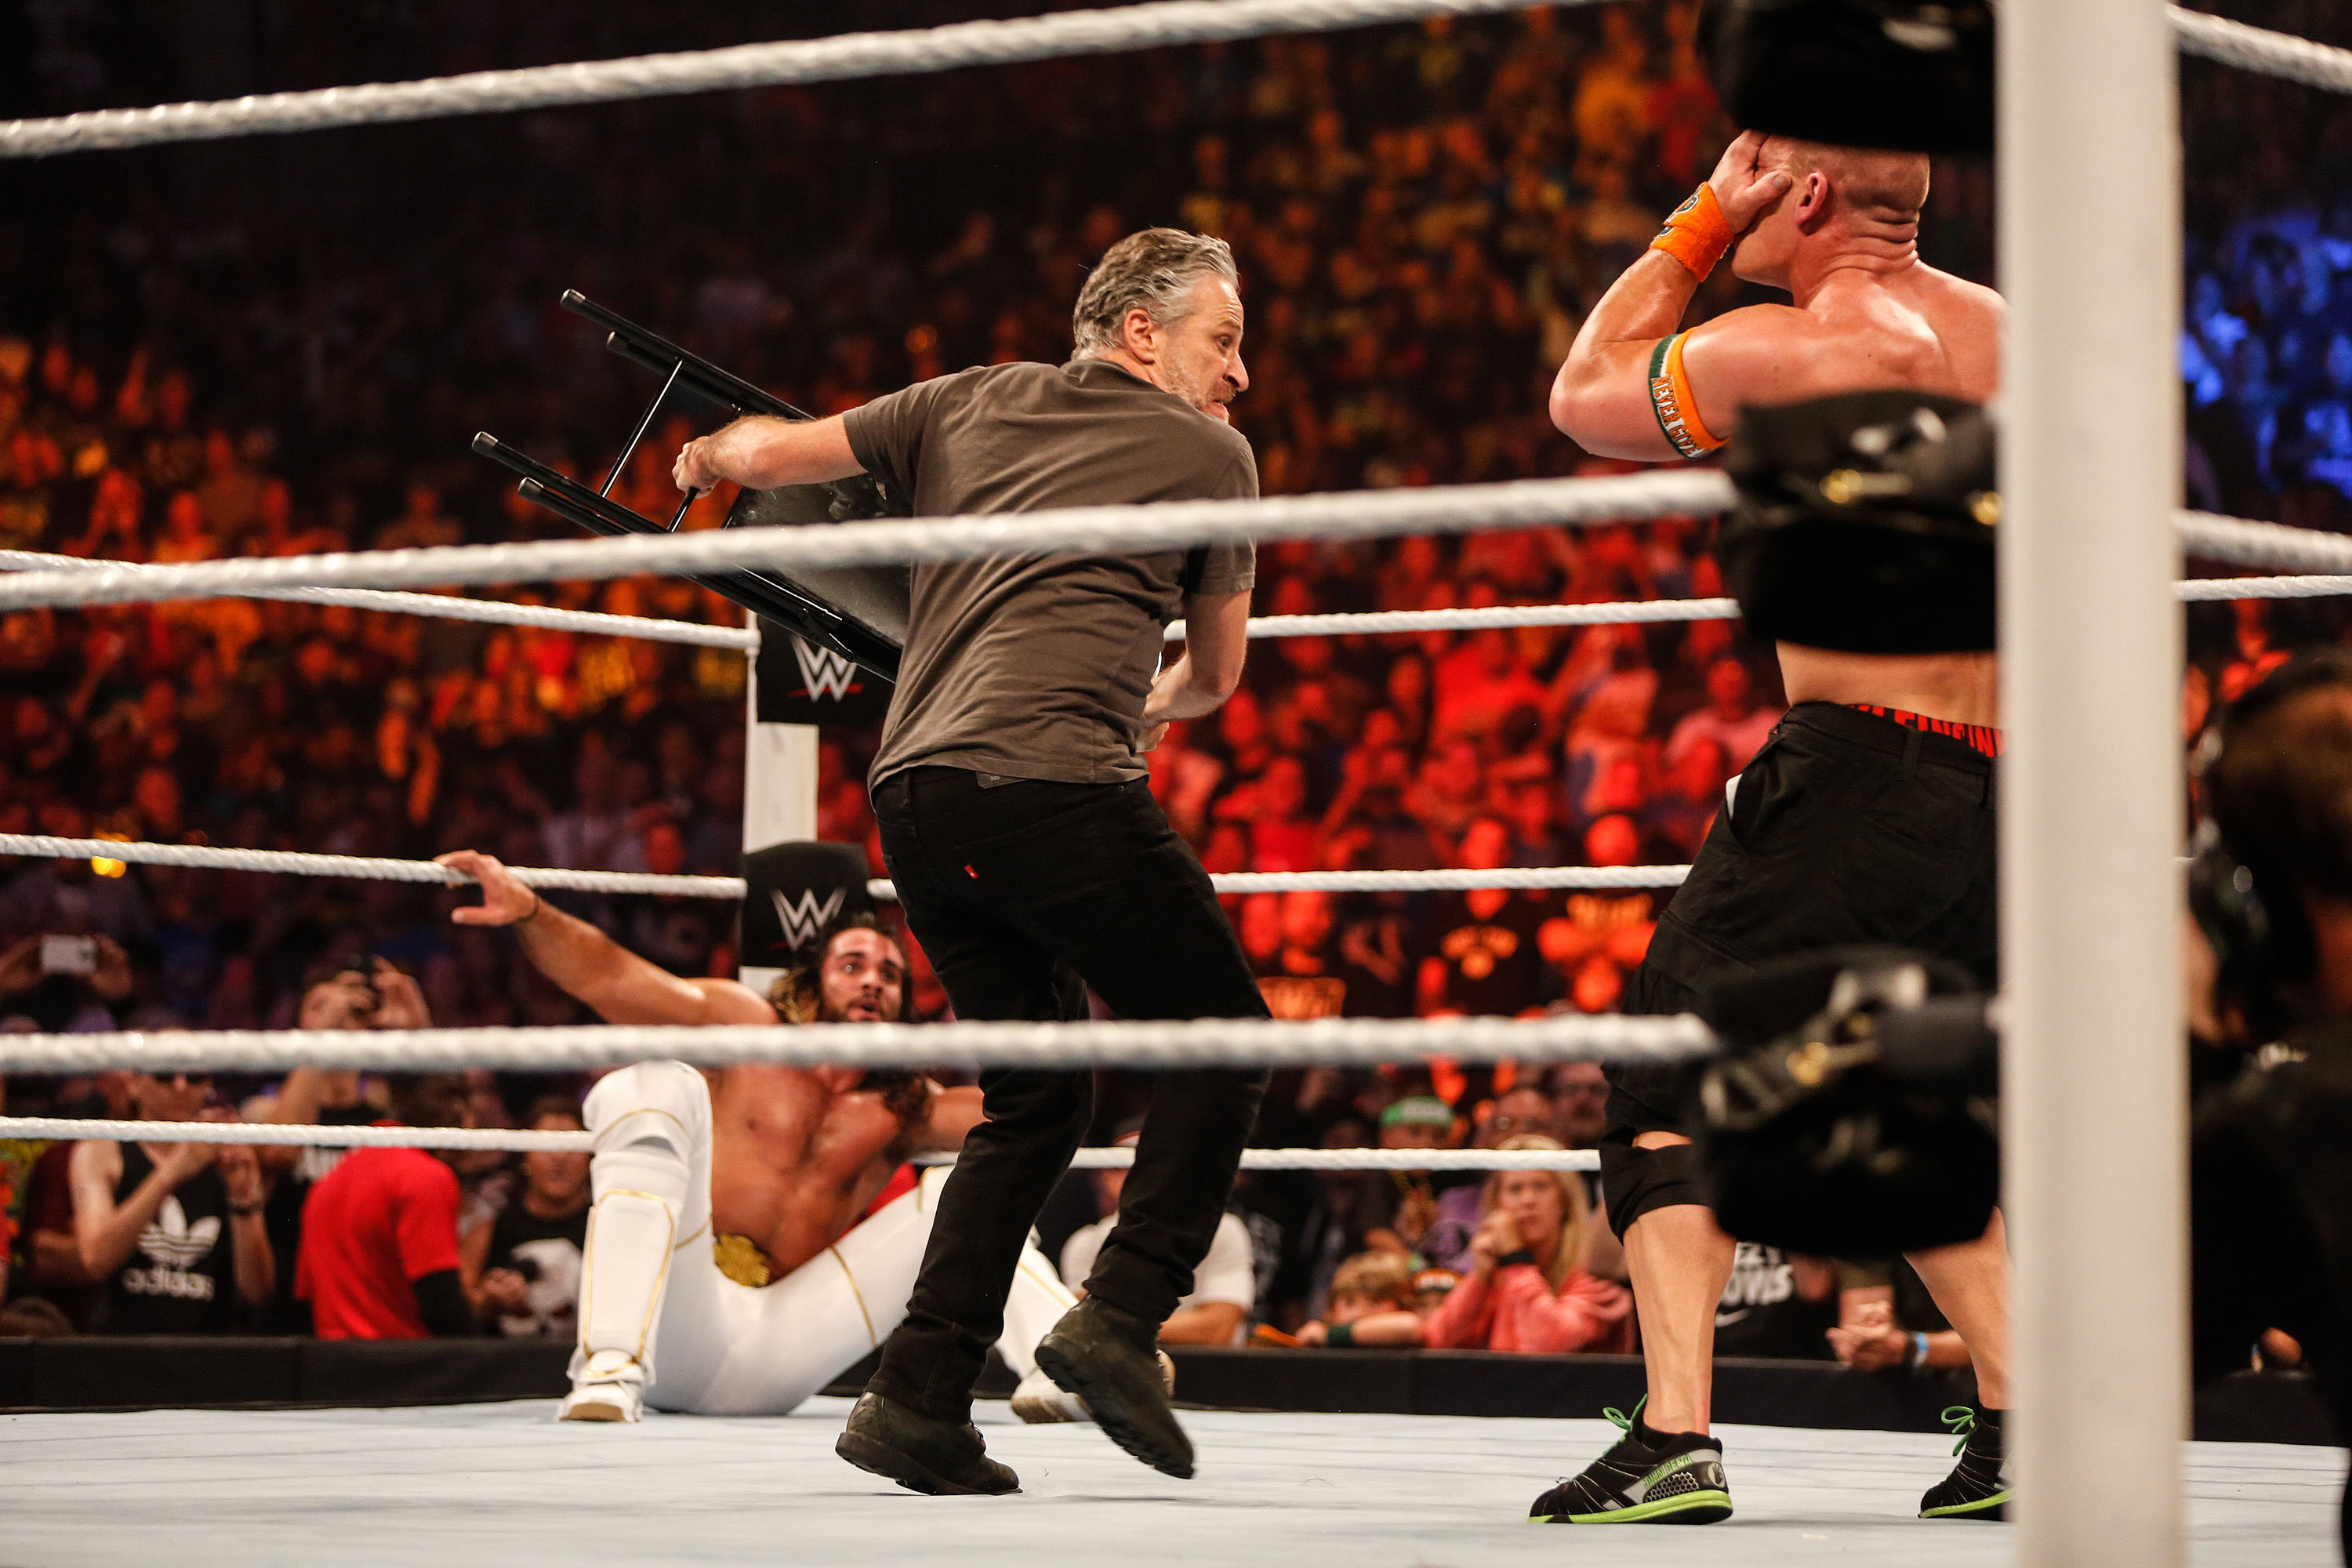 Jon Stewart gets into the action at WWE SummerSlam 2015 Barclays Center of Brooklyn in New York City on Aug. 23, 2015. (JP Yim—Getty Images)